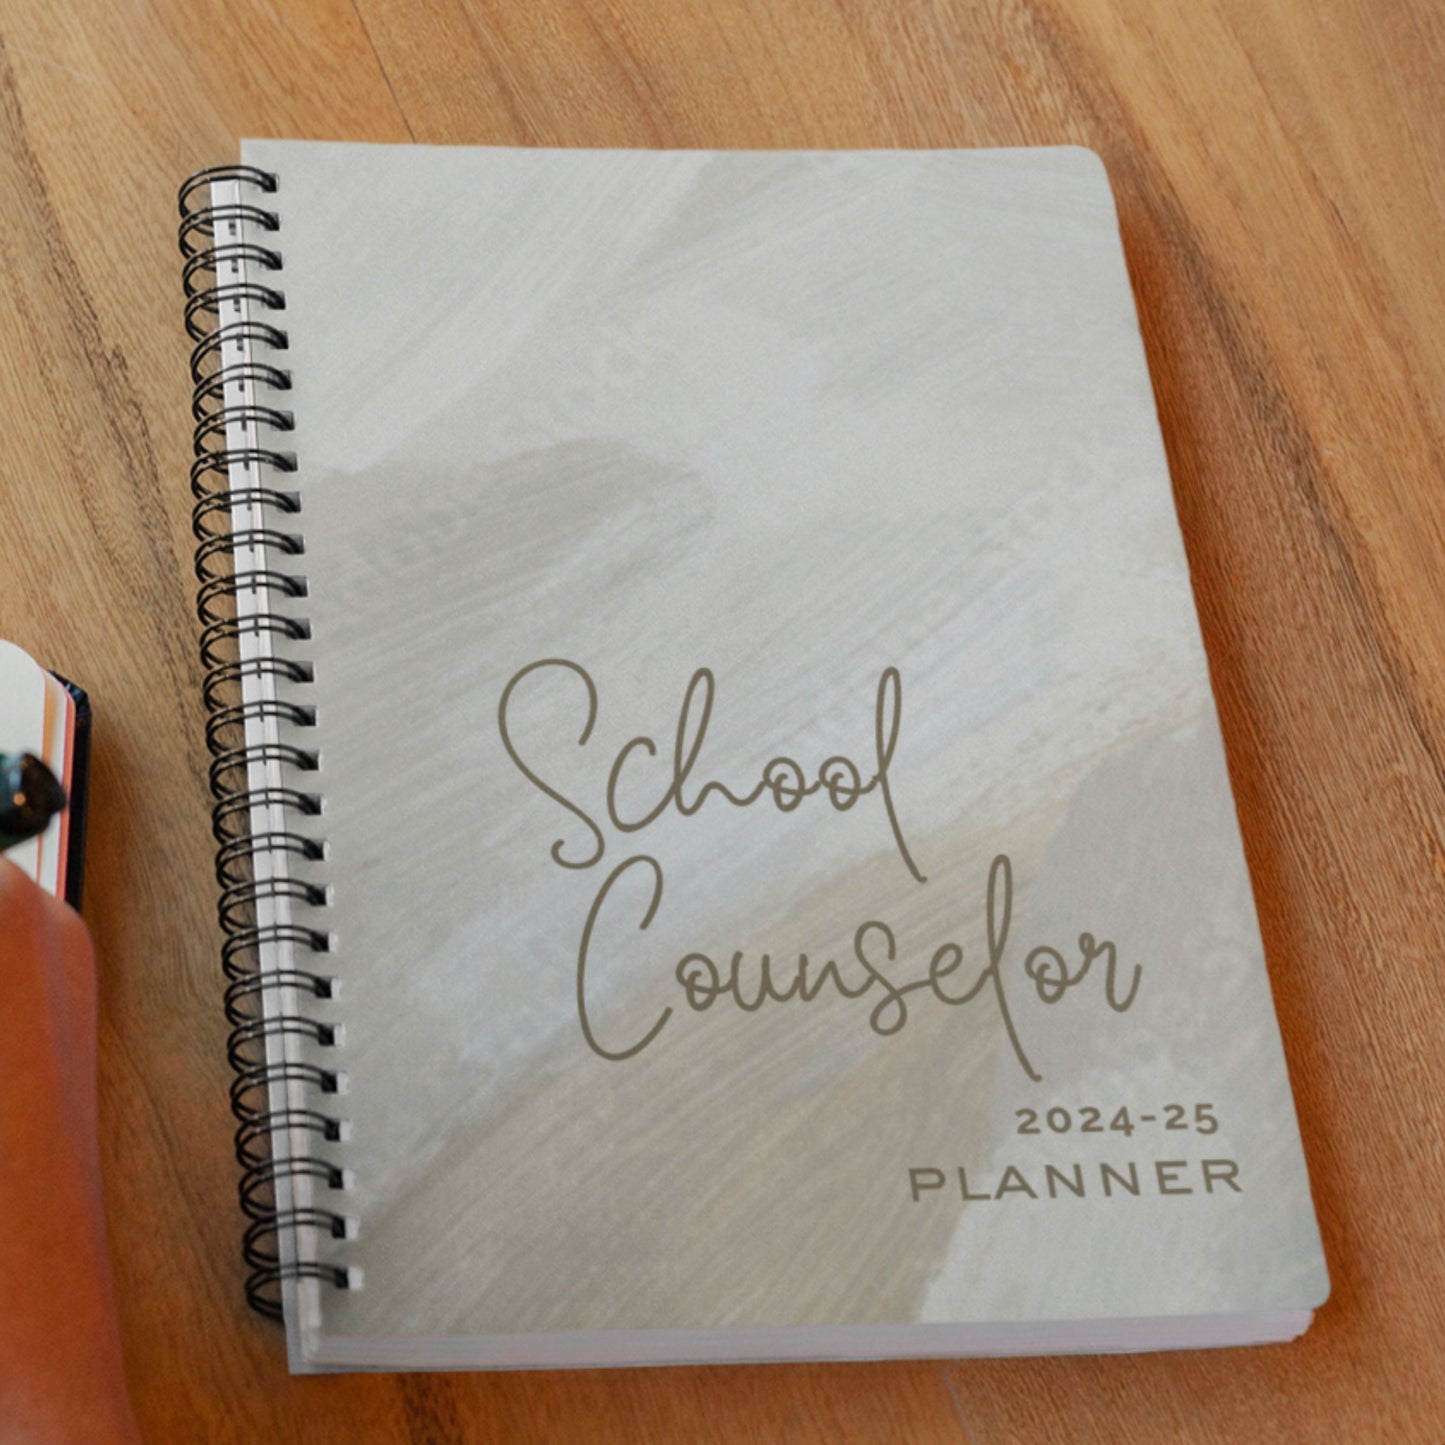 Printed Creamy School Counselor Planner 2024-2025 Size 9" X 11"